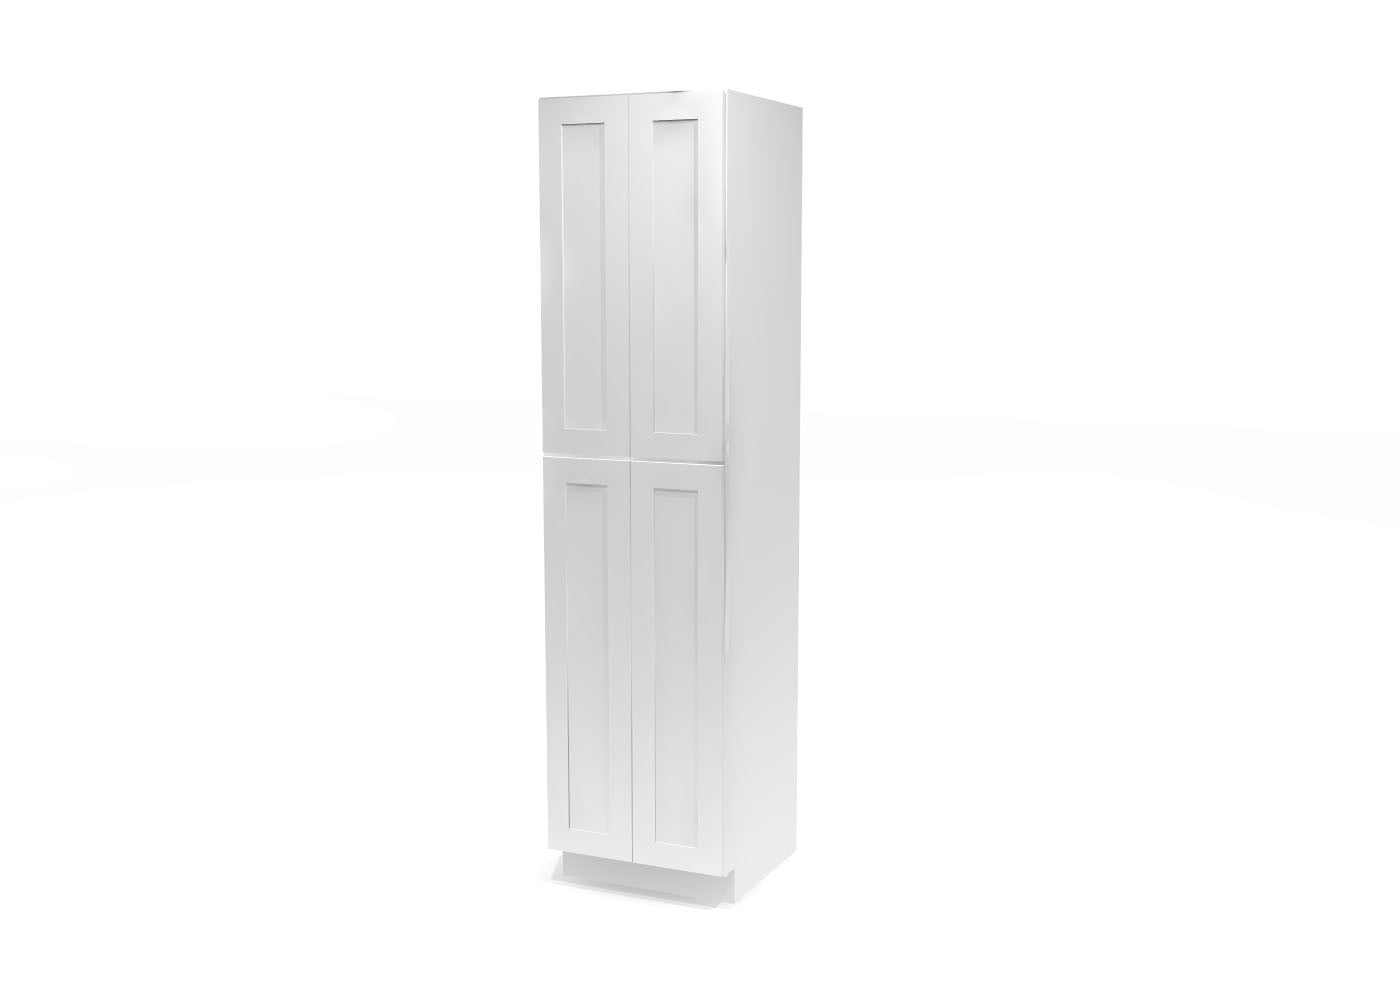 Utility Pantry Double Door 96" by 24" Wide White Shaker Cabinet